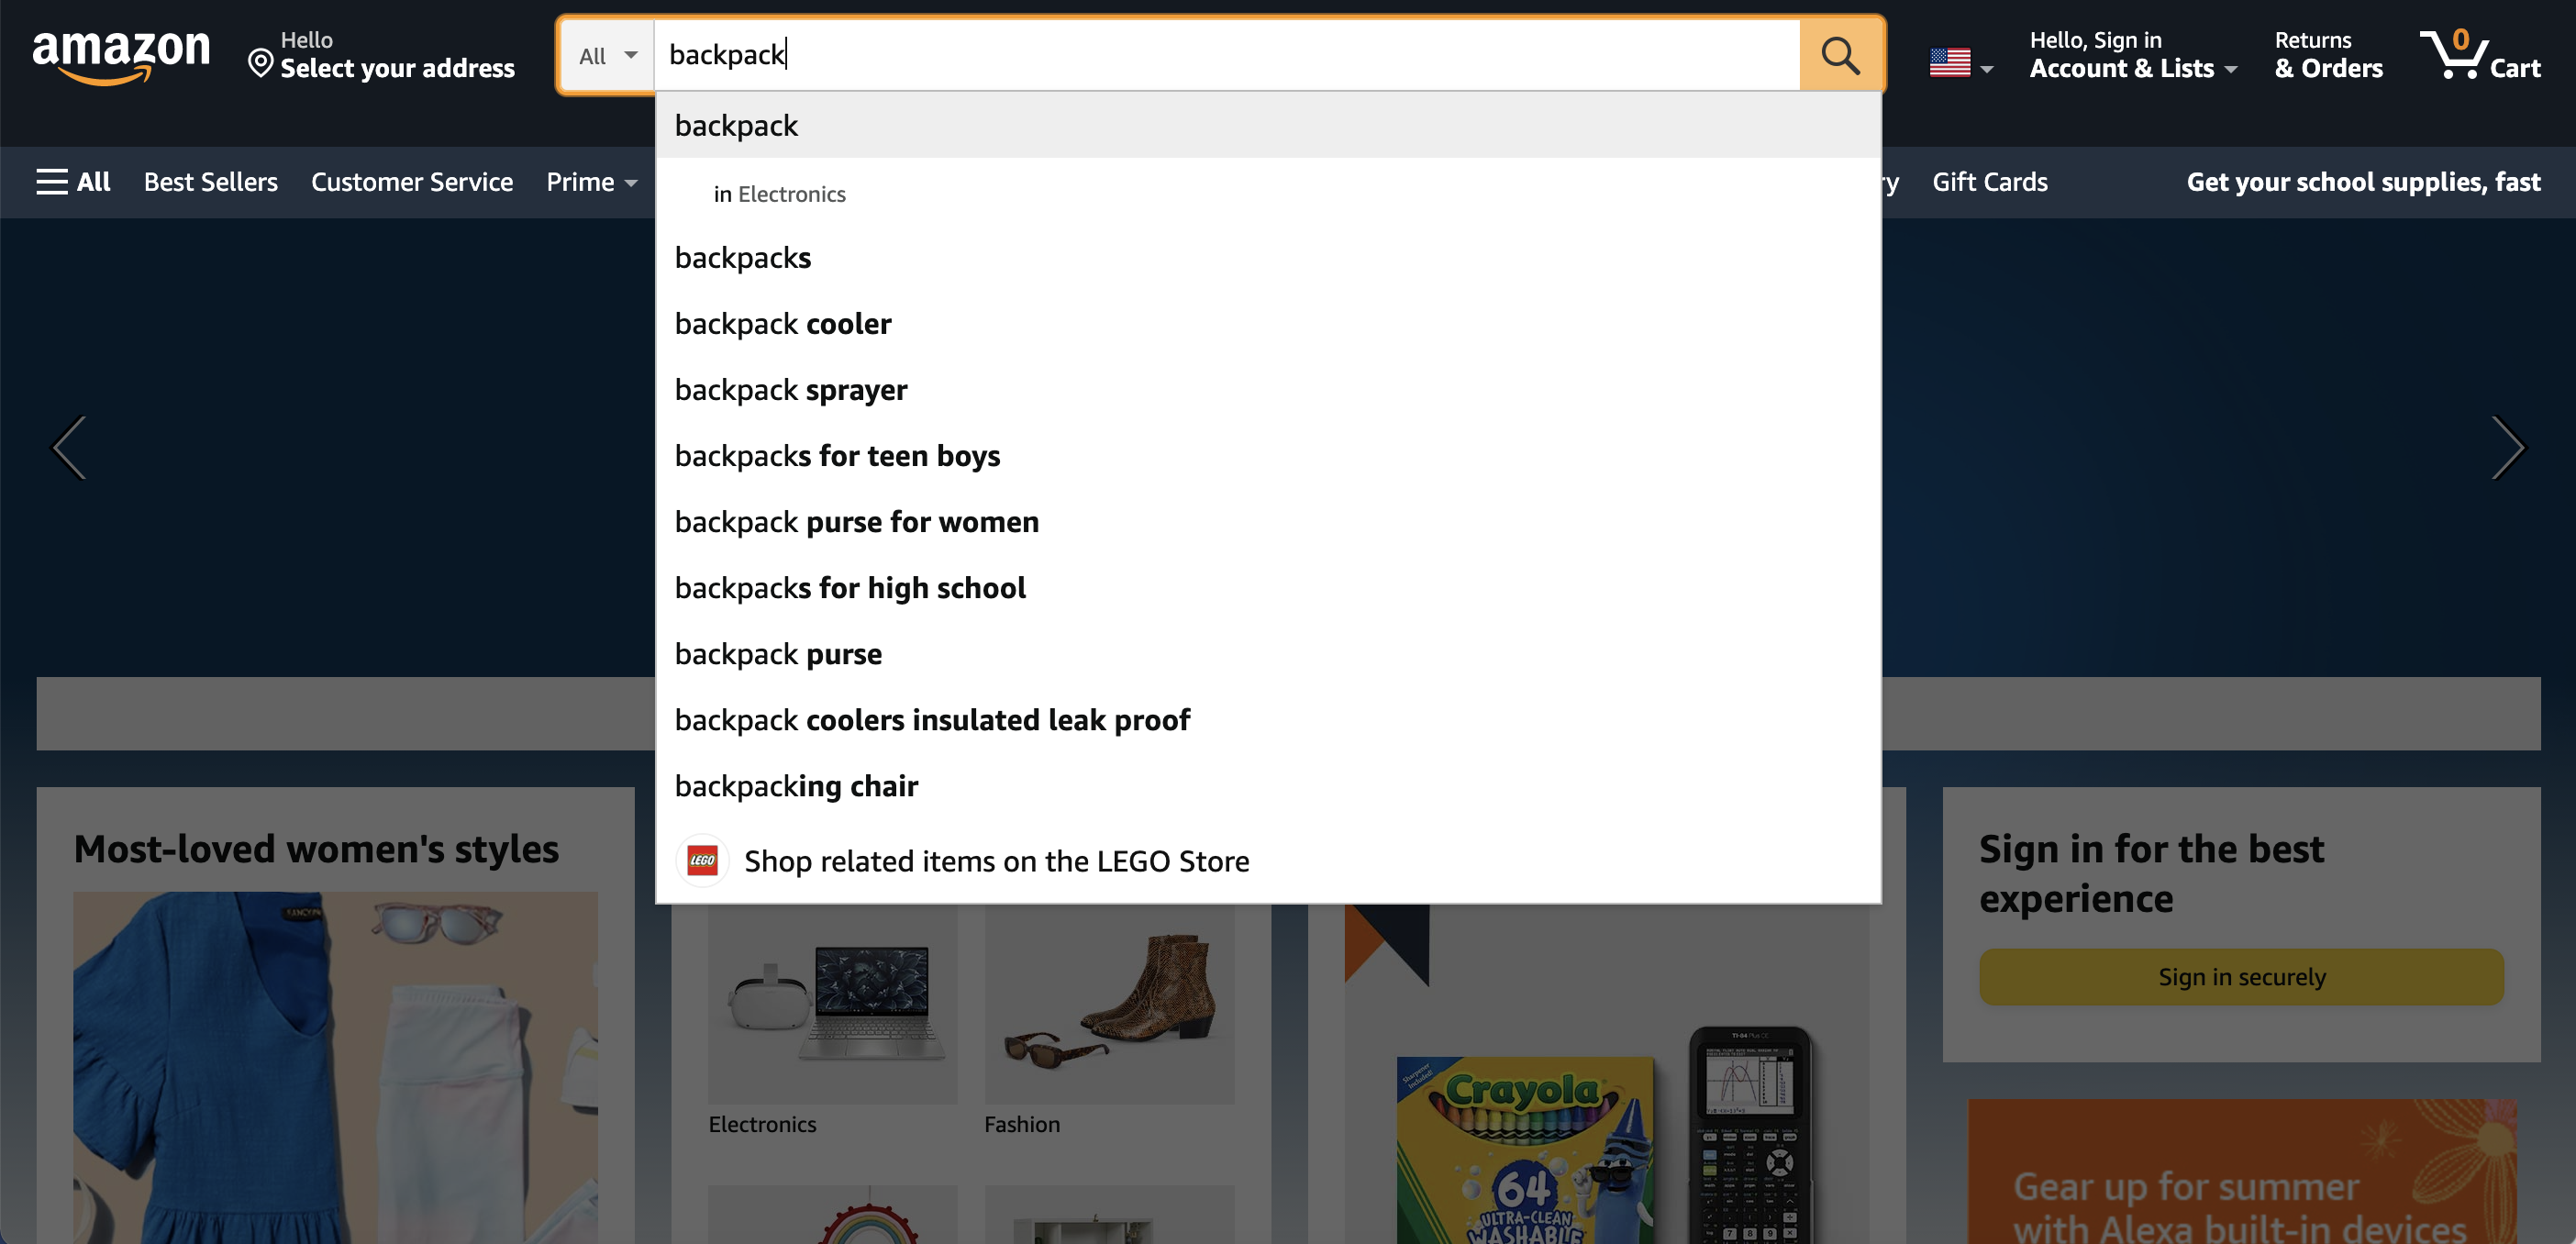 Amazon search for "backpack"